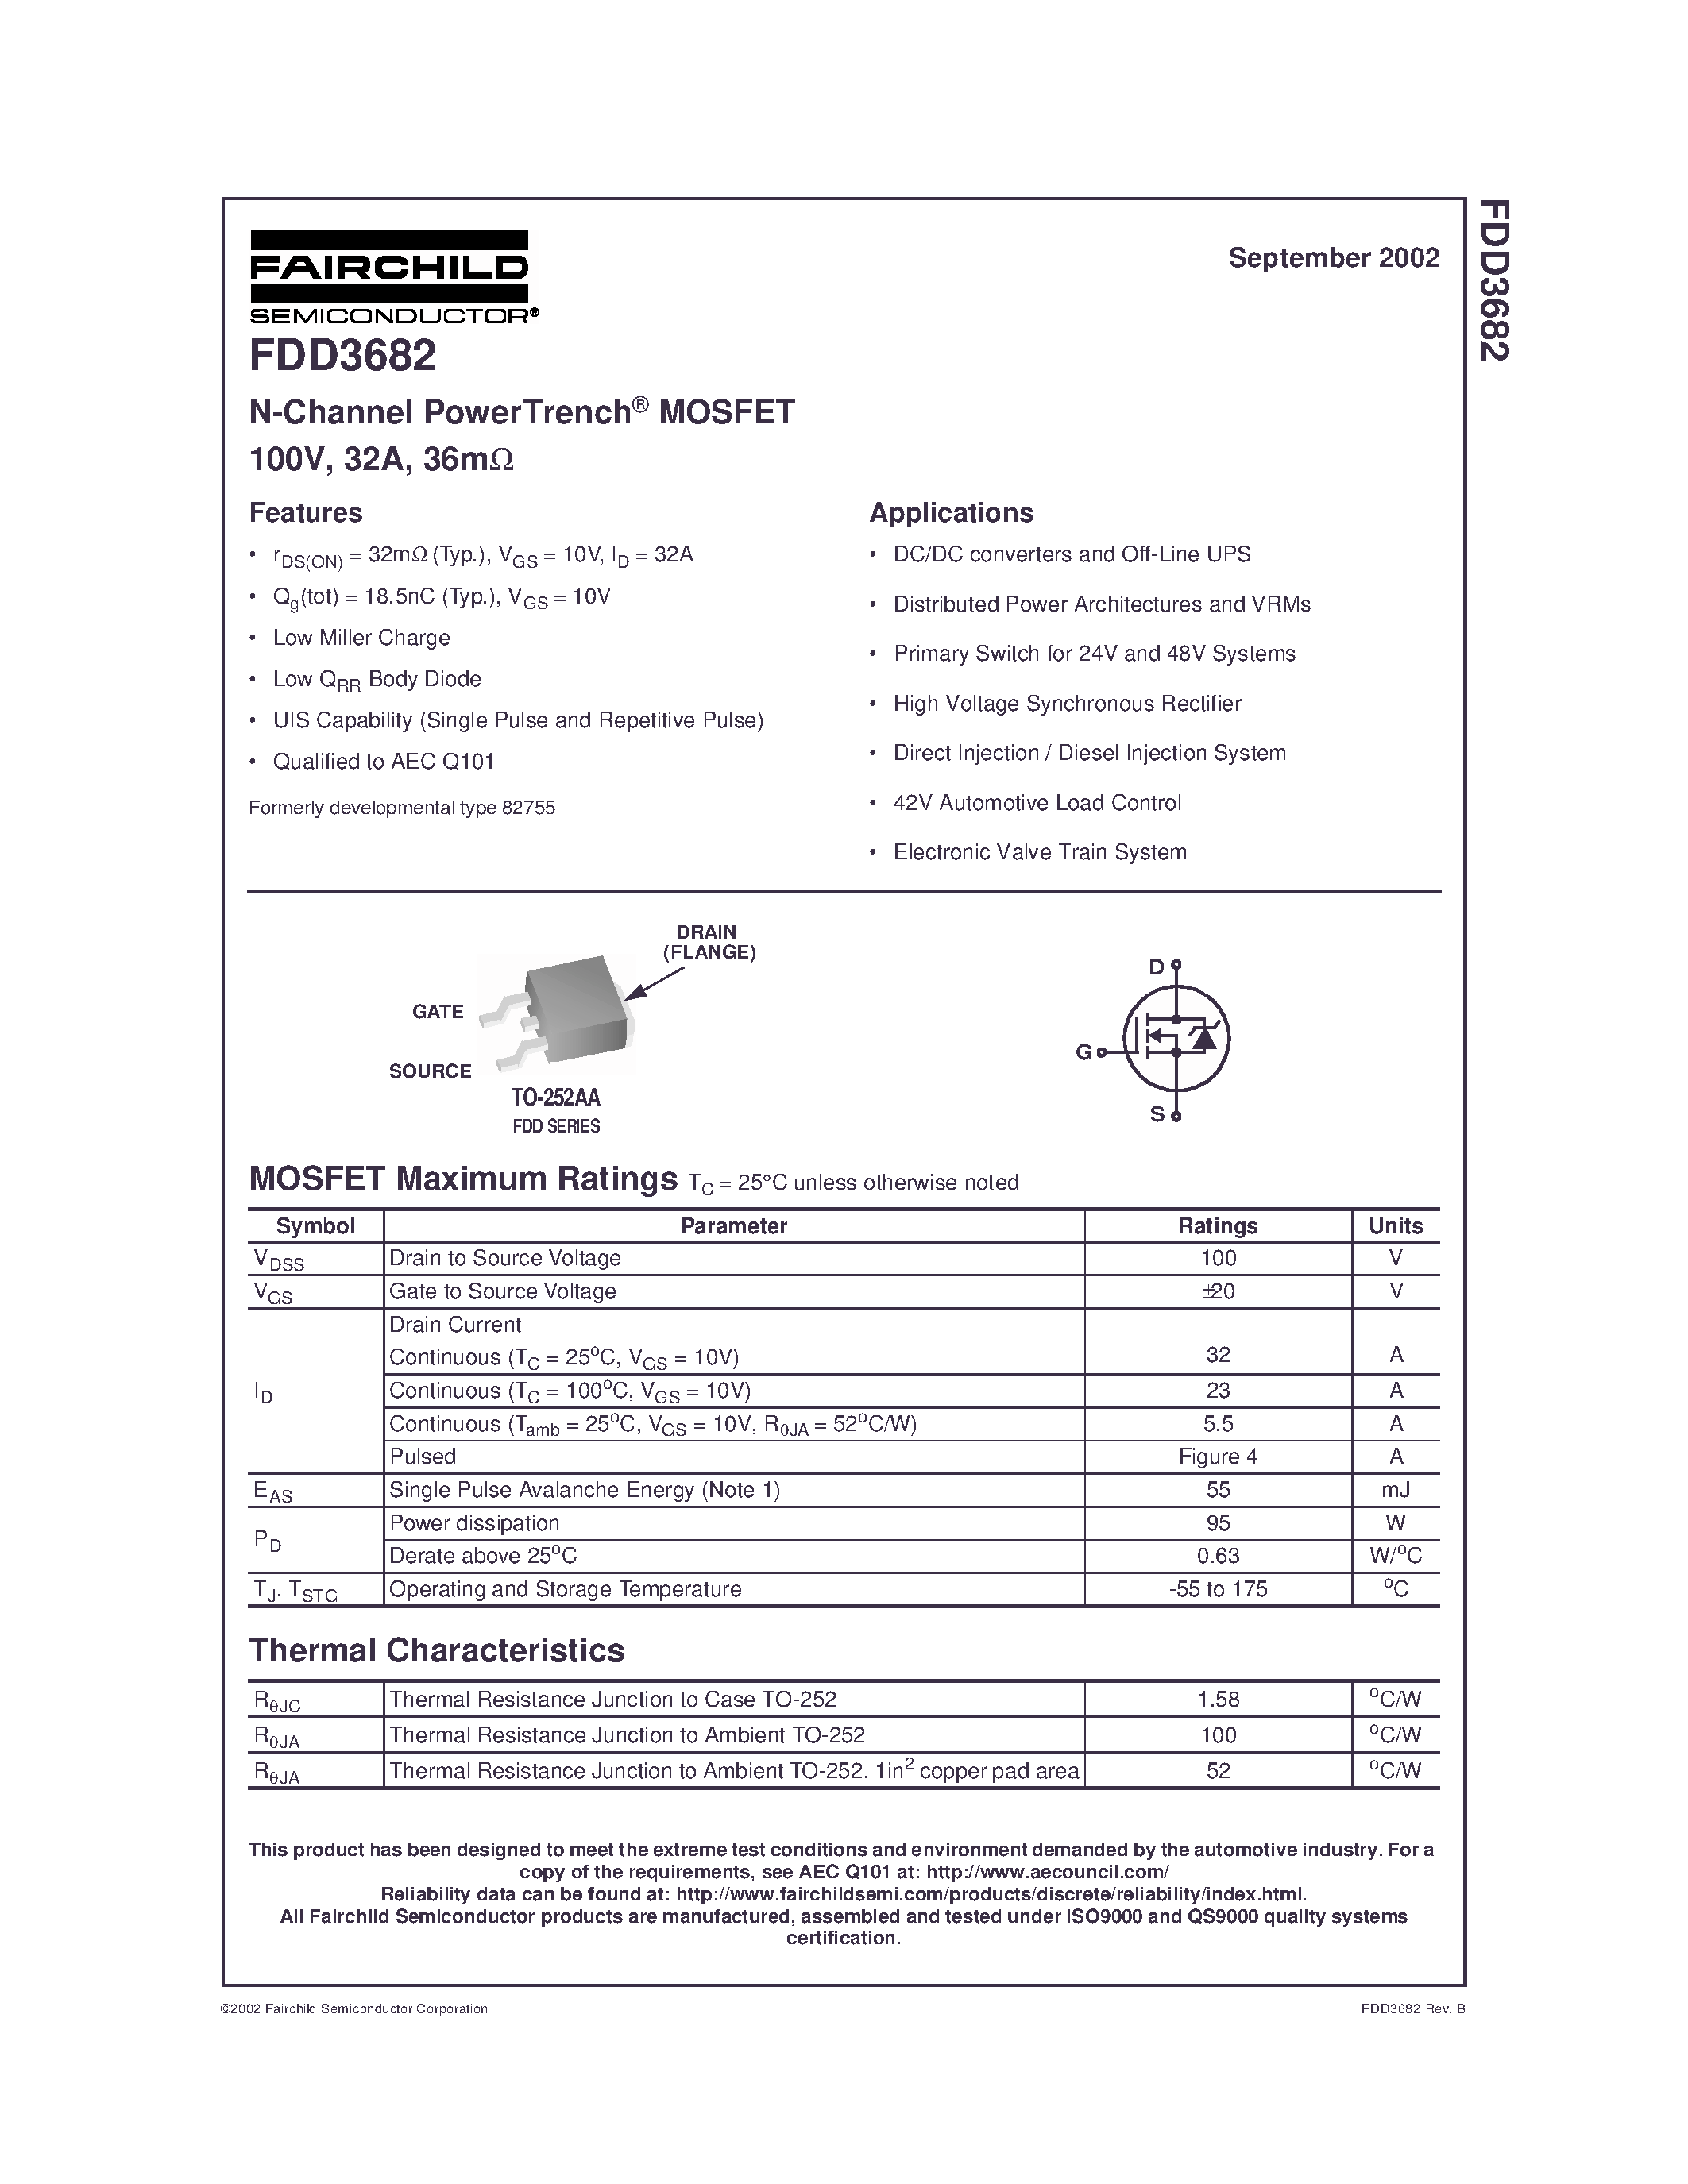 Даташит FDD3682 - N-Channel PowerTrench MOSFET 100V/ 32A/ 36m страница 1